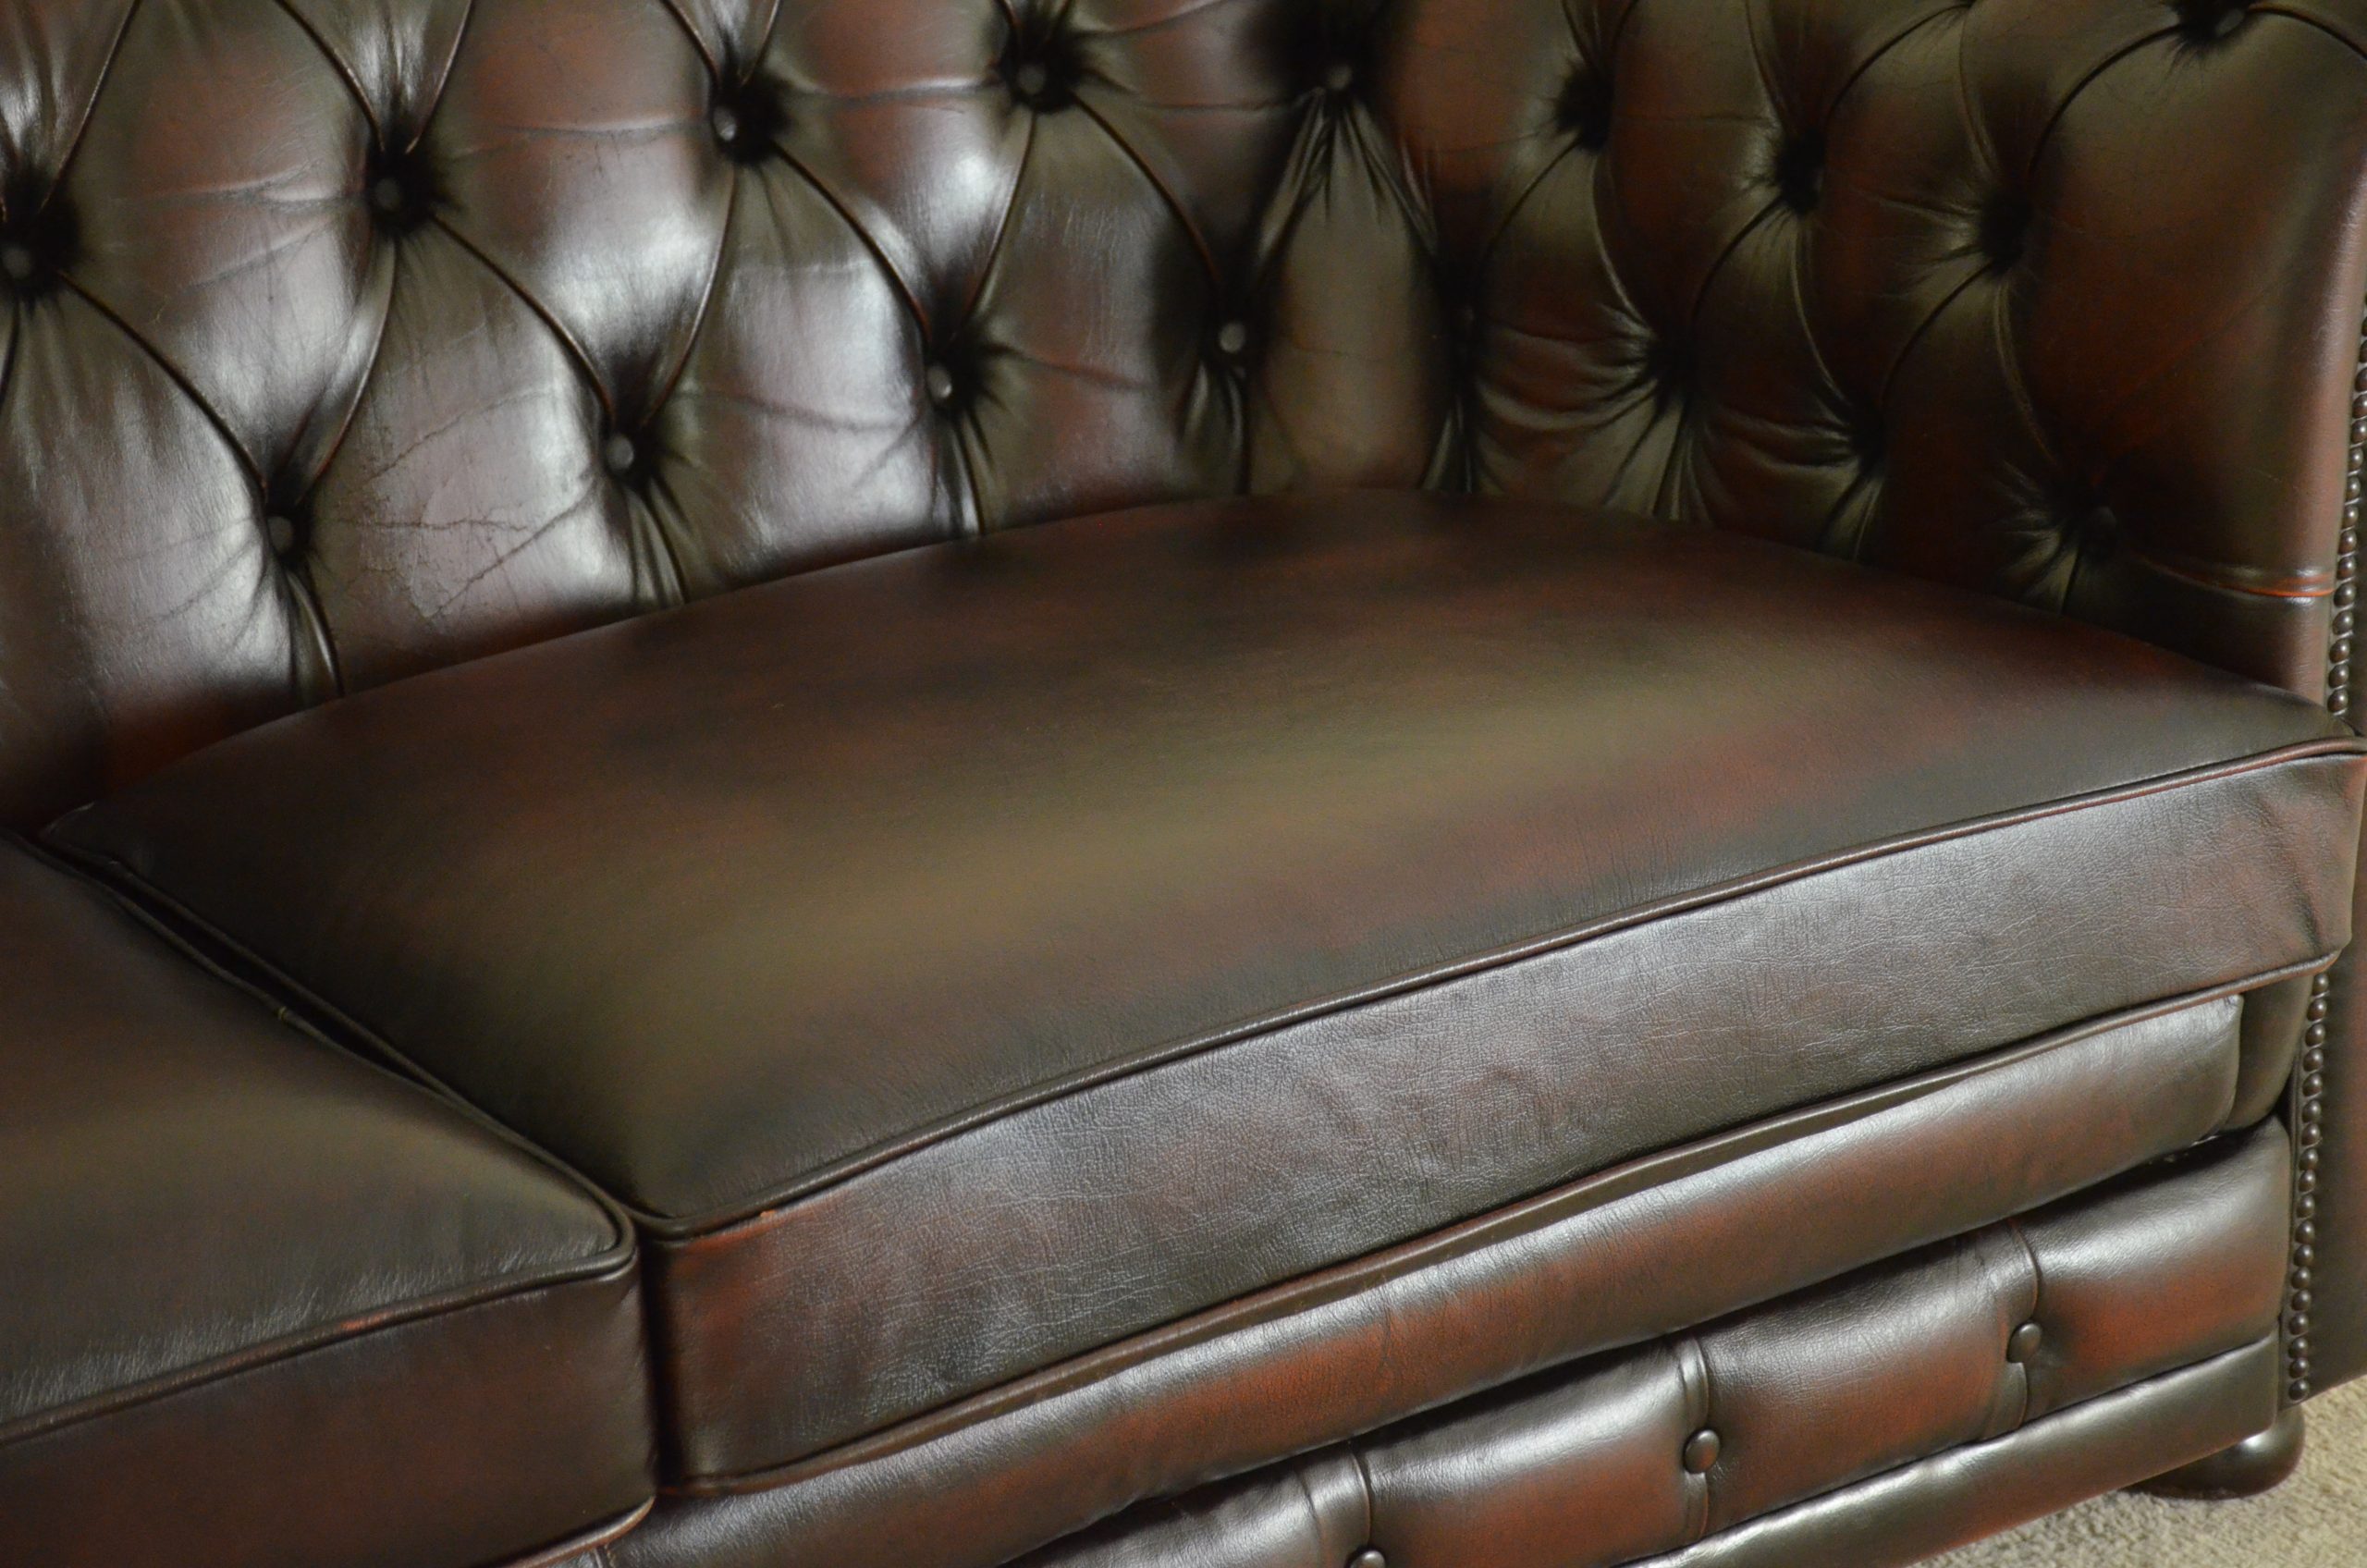 3 zits chesterfield occasion york fishmouth in antique Rust